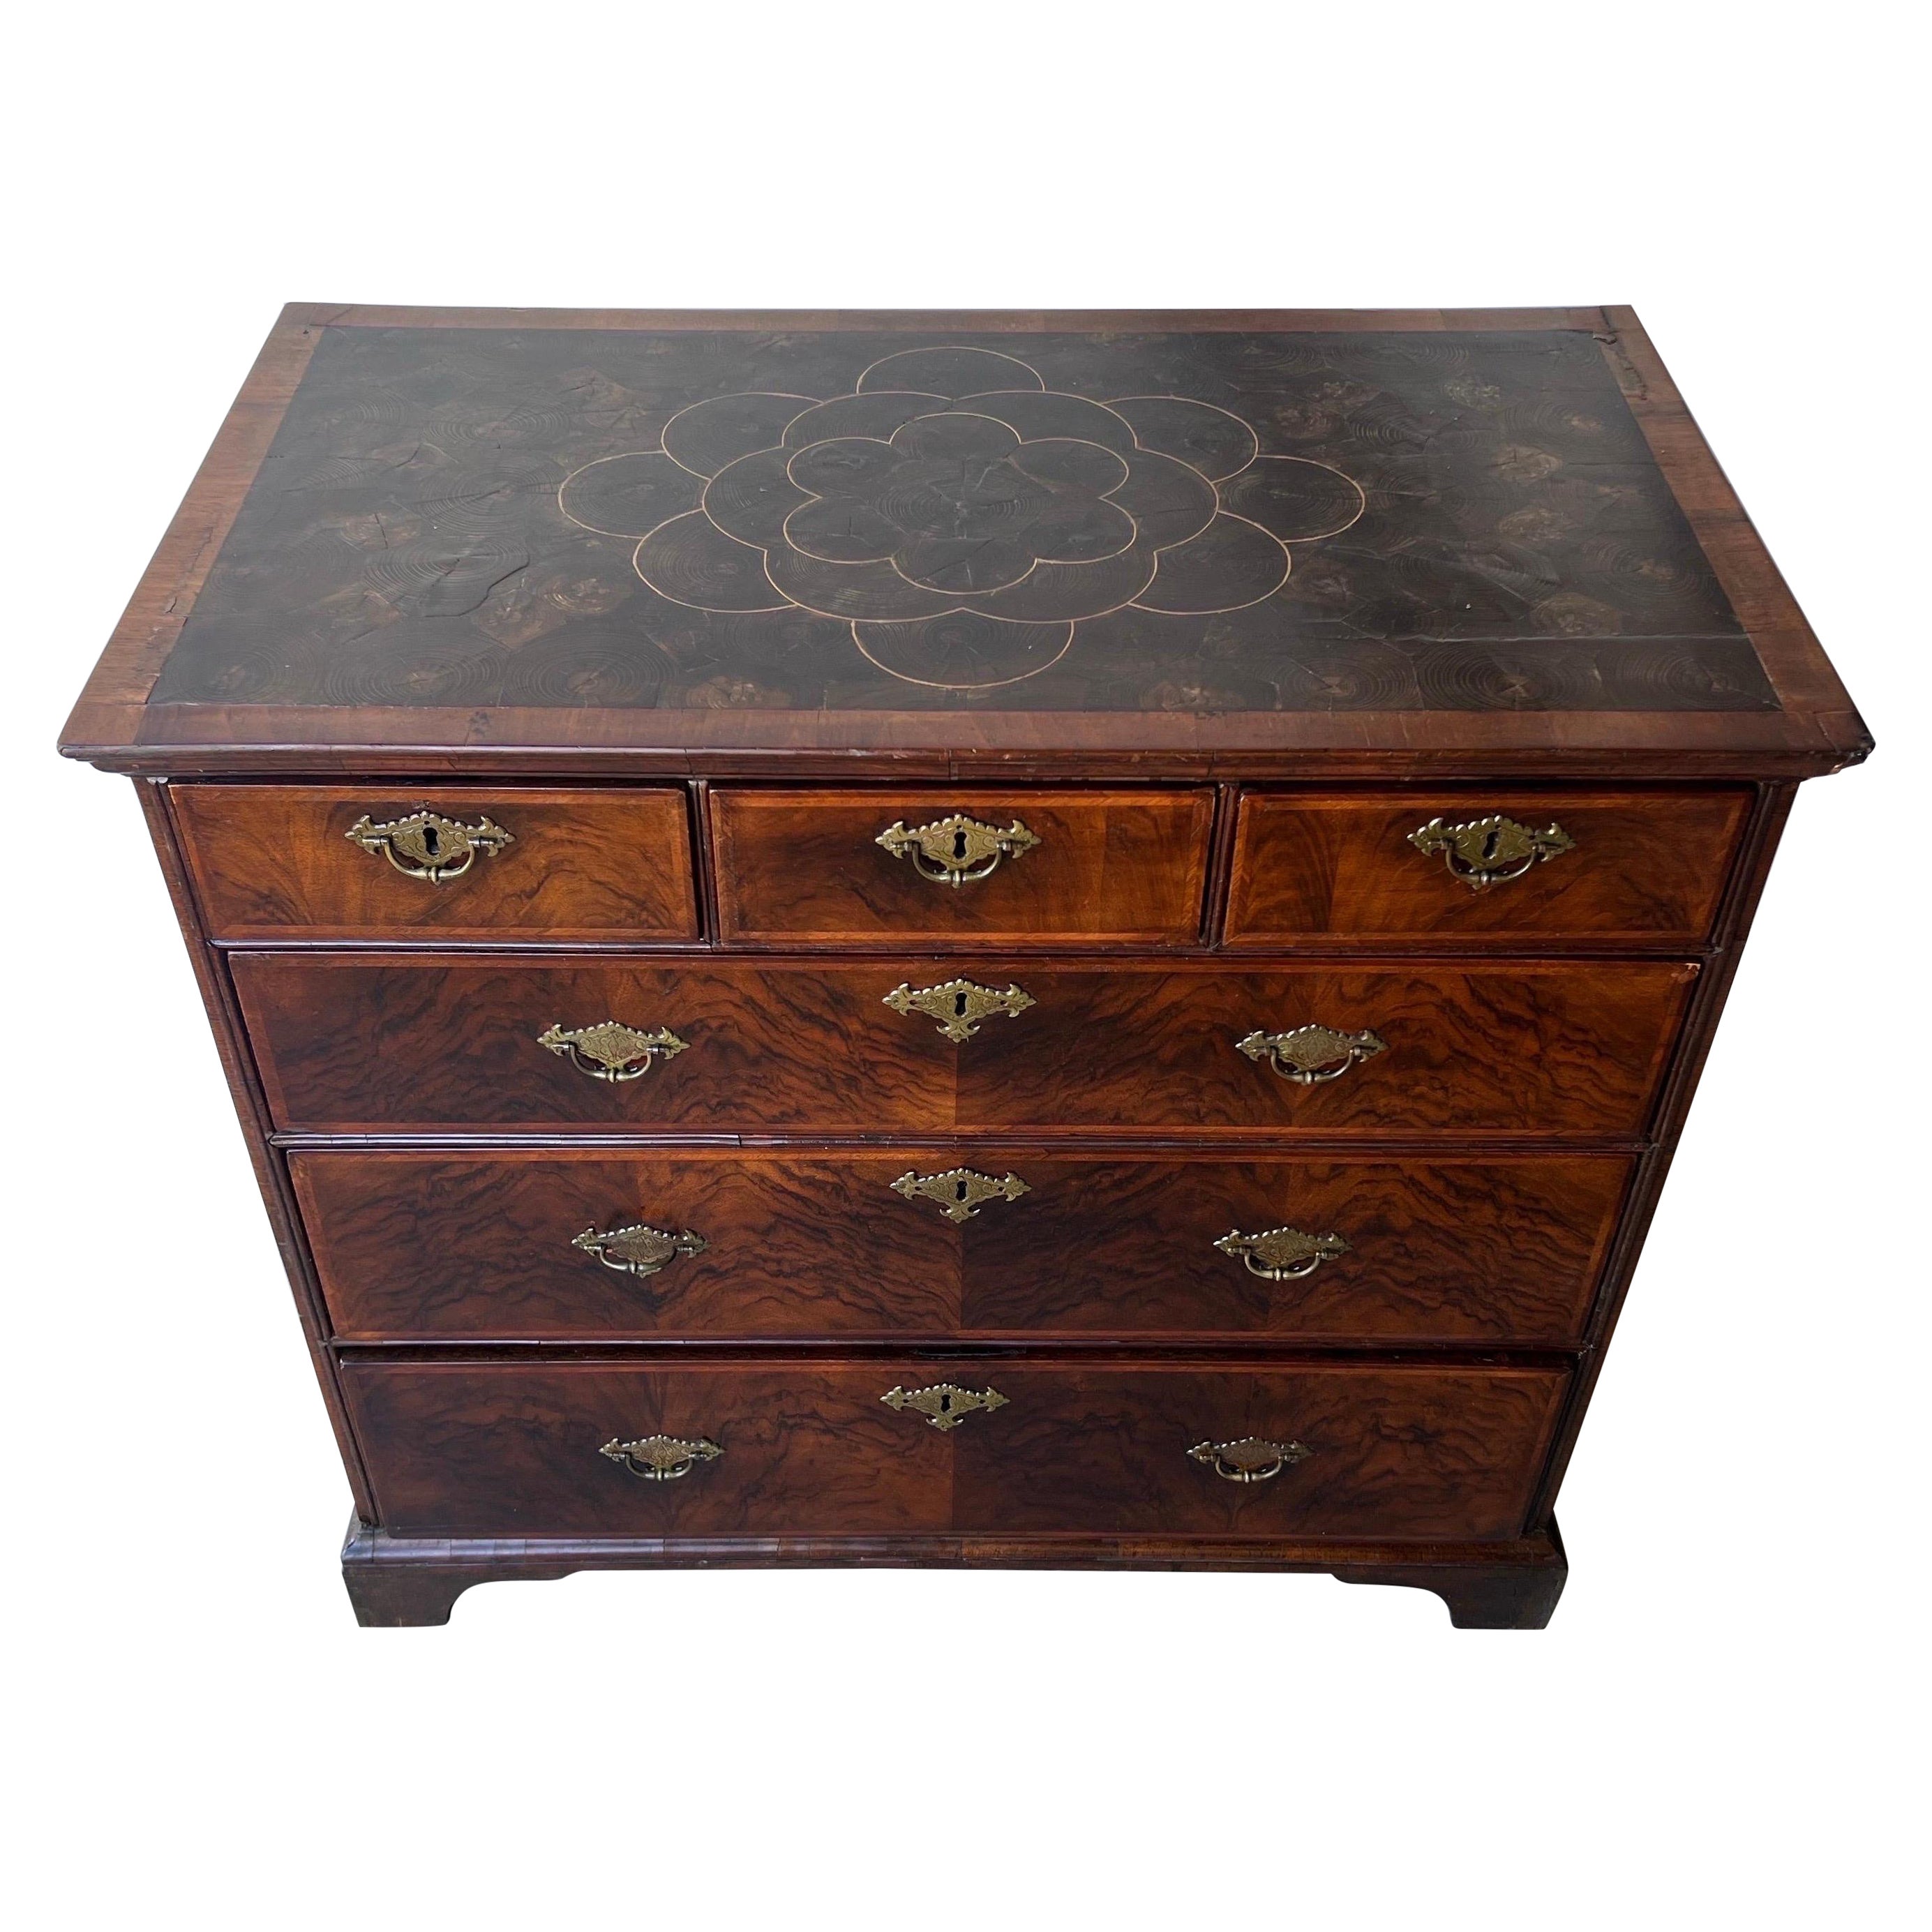 Early 18th century inlaid oyster veneered English chest 